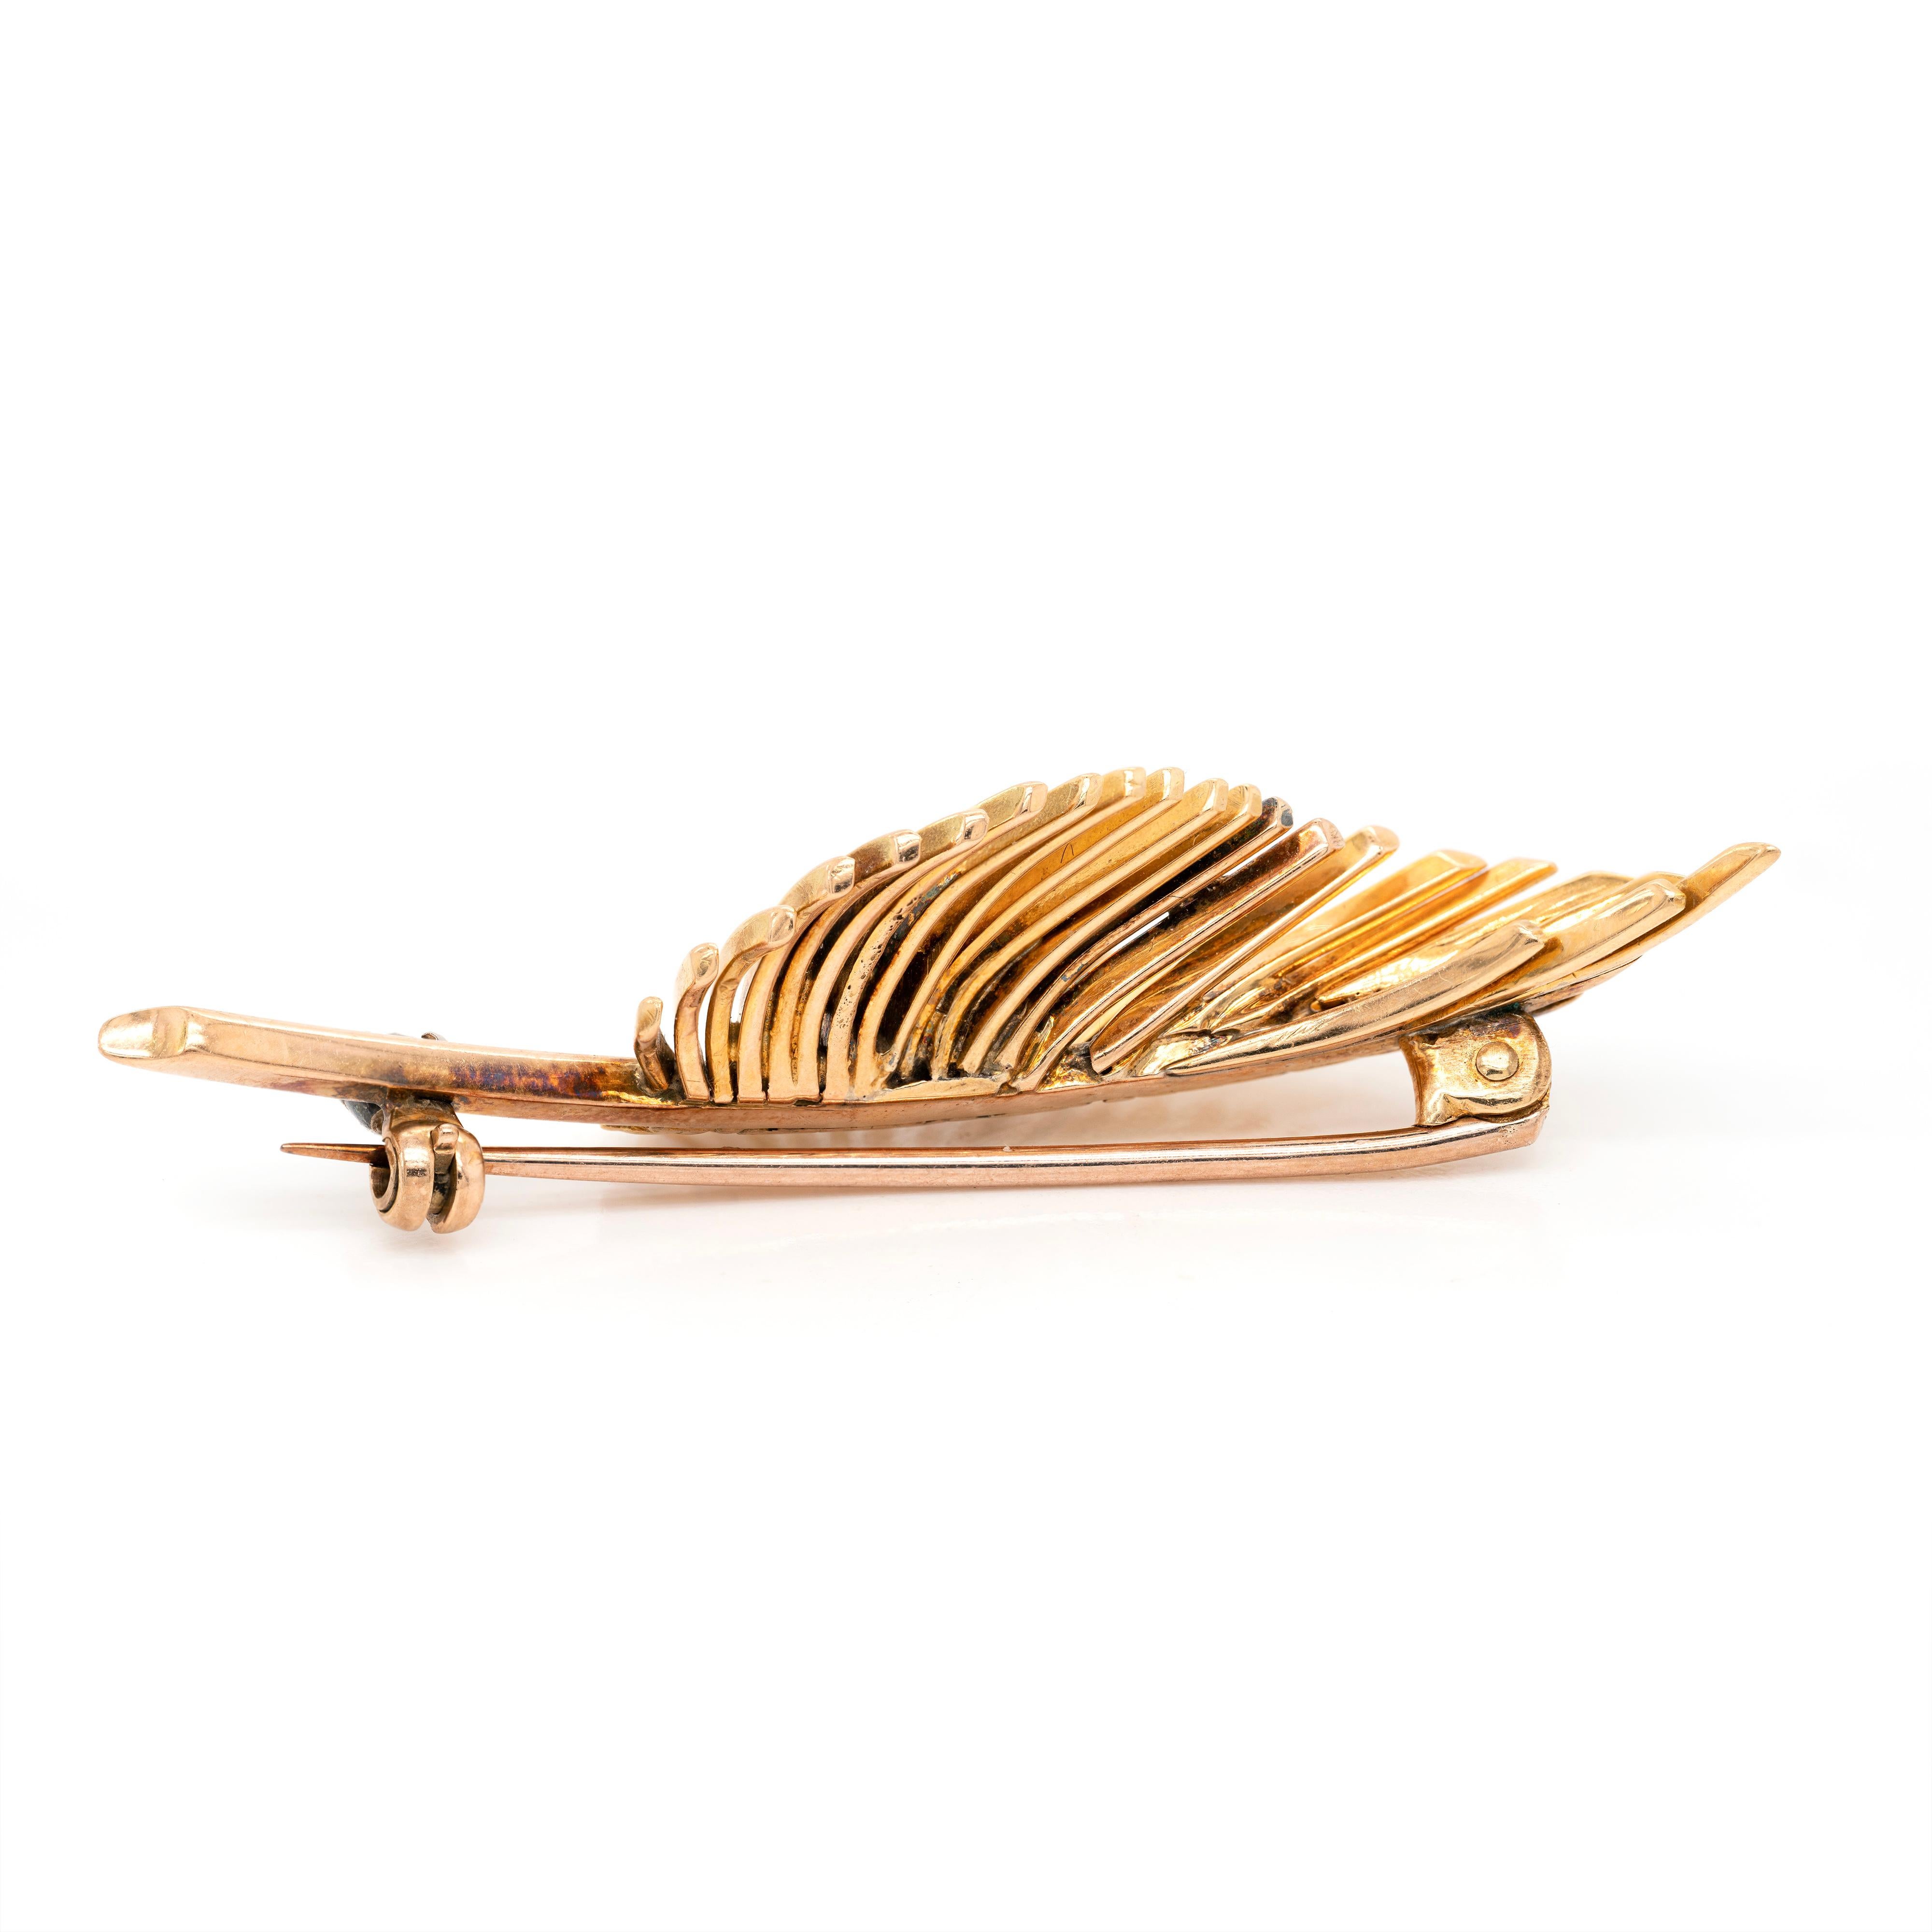 This wonderful brooch is designed as an open work leaf skeleton crafted from high polish 18 carat yellow gold. The whimsical piece is beautifully decorated with 4 round brilliant cut diamonds, weighing approximately 0.36ct combined, all mounted in